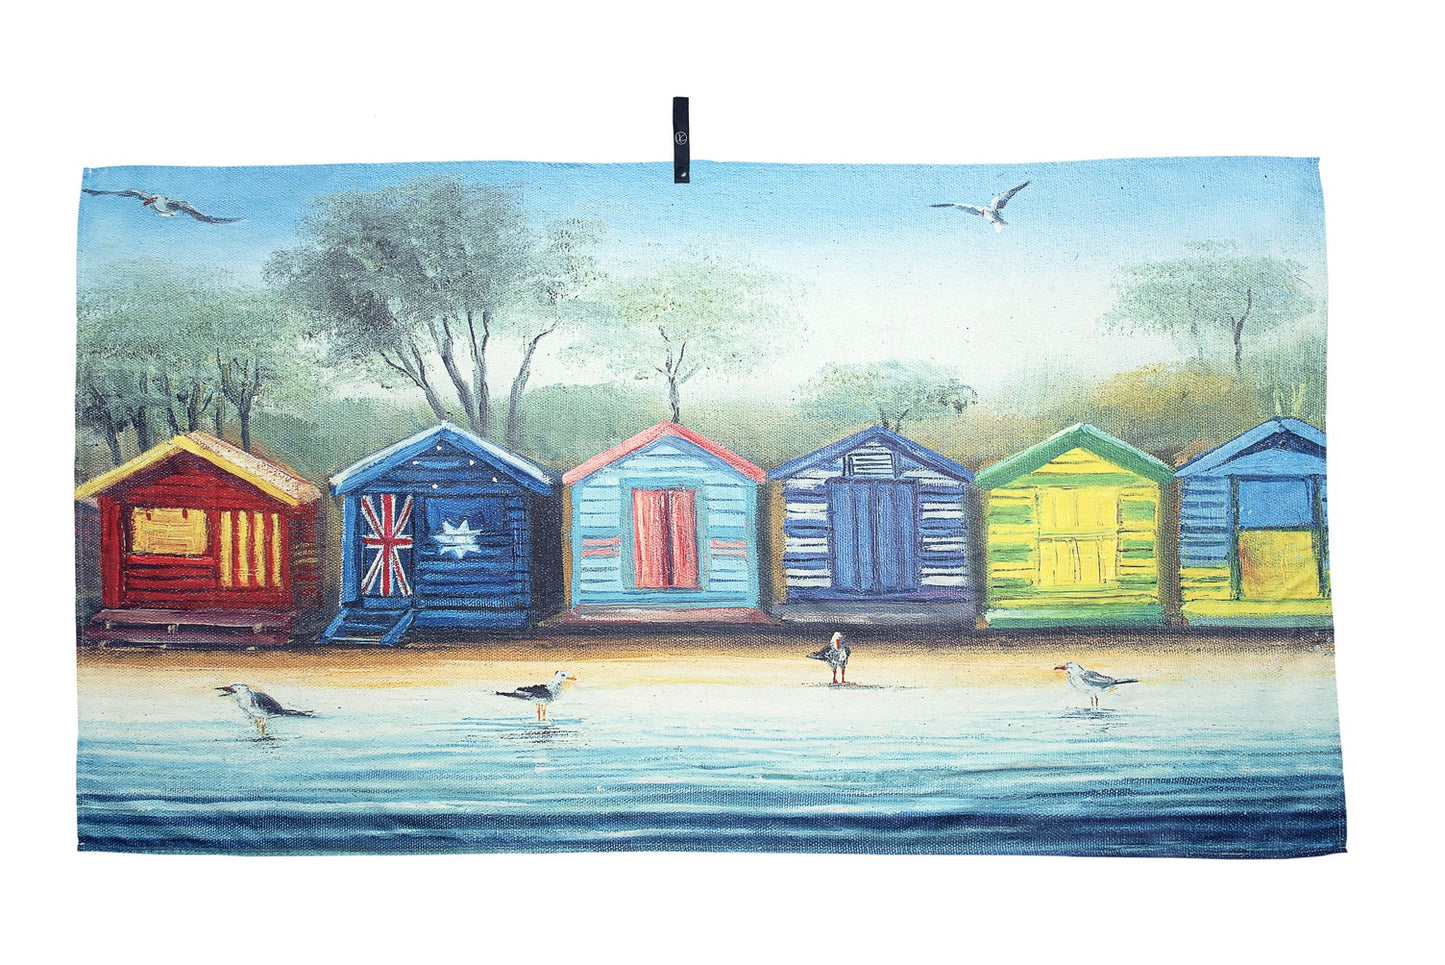 Melbourne’s Brighton Beach microfibre artistic towel. The towel shows an art inspiration of Victoria’s beautiful Brighton Beach. The art printed on the towel shows the colourful beach boxes, also called bathing boxes, including the one printed with Australia flag. The artwork also includes seagulls, a calm sea and Australian bush as a background. Large size, 170cm x 95cm, soft touch, compact and sand free beach towel. An Aussie-inspired art showcasing magnificent landmarks and the Aussie lifestyle